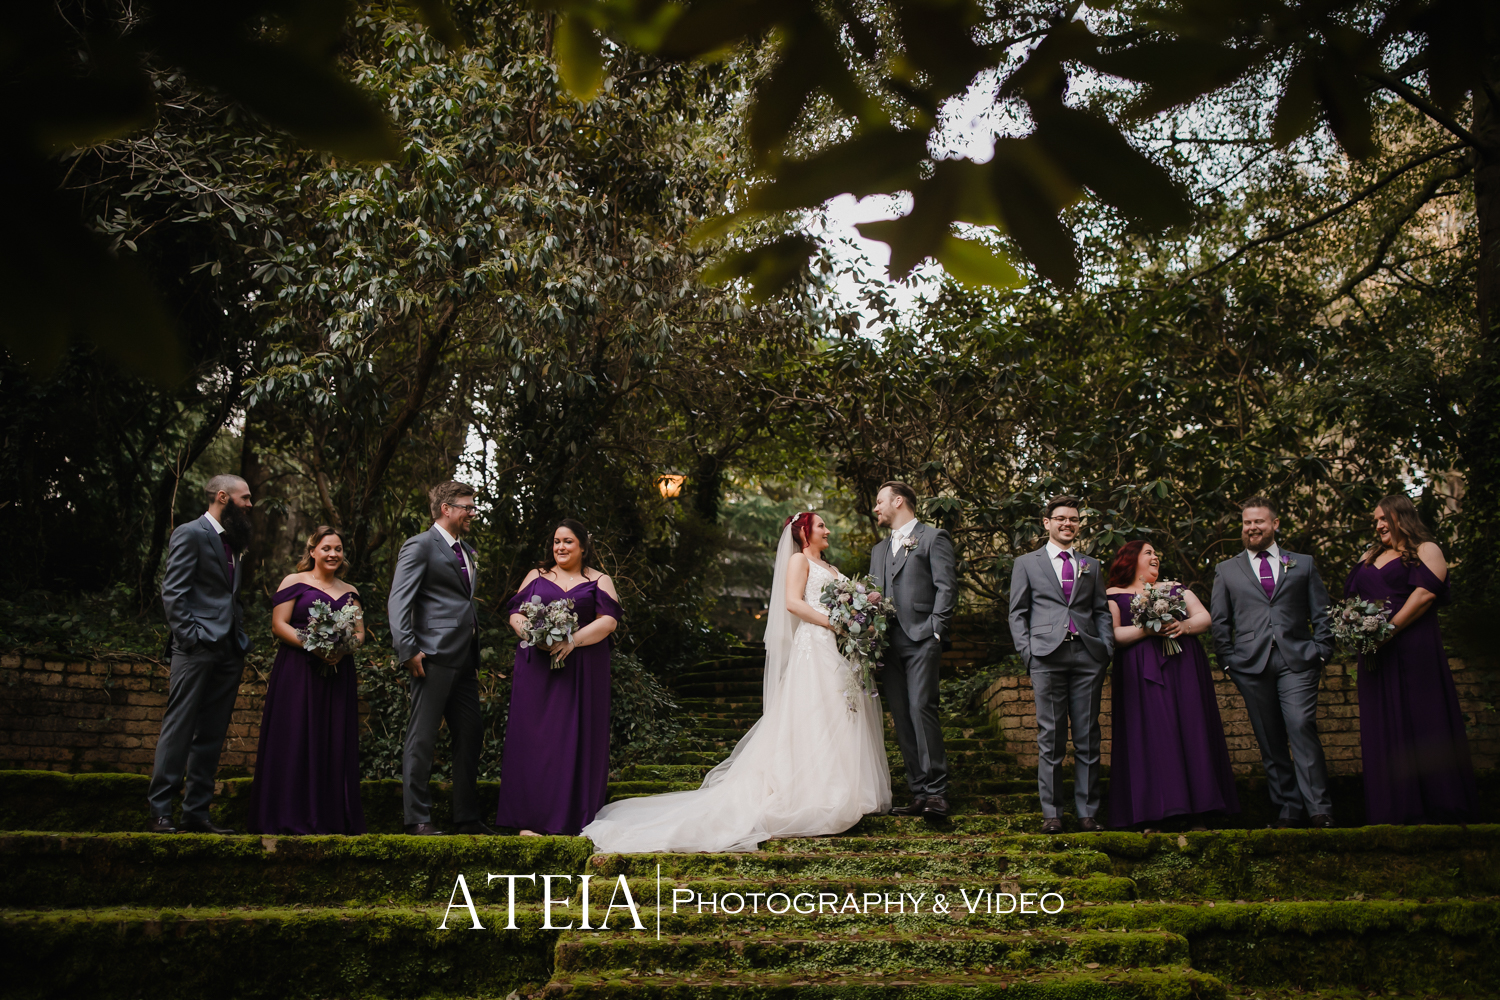 , Ashleigh and Douglas&#8217; wedding photography at Tatra Receptions Mount Dandenong captured by ATEIA Photography &#038; Video